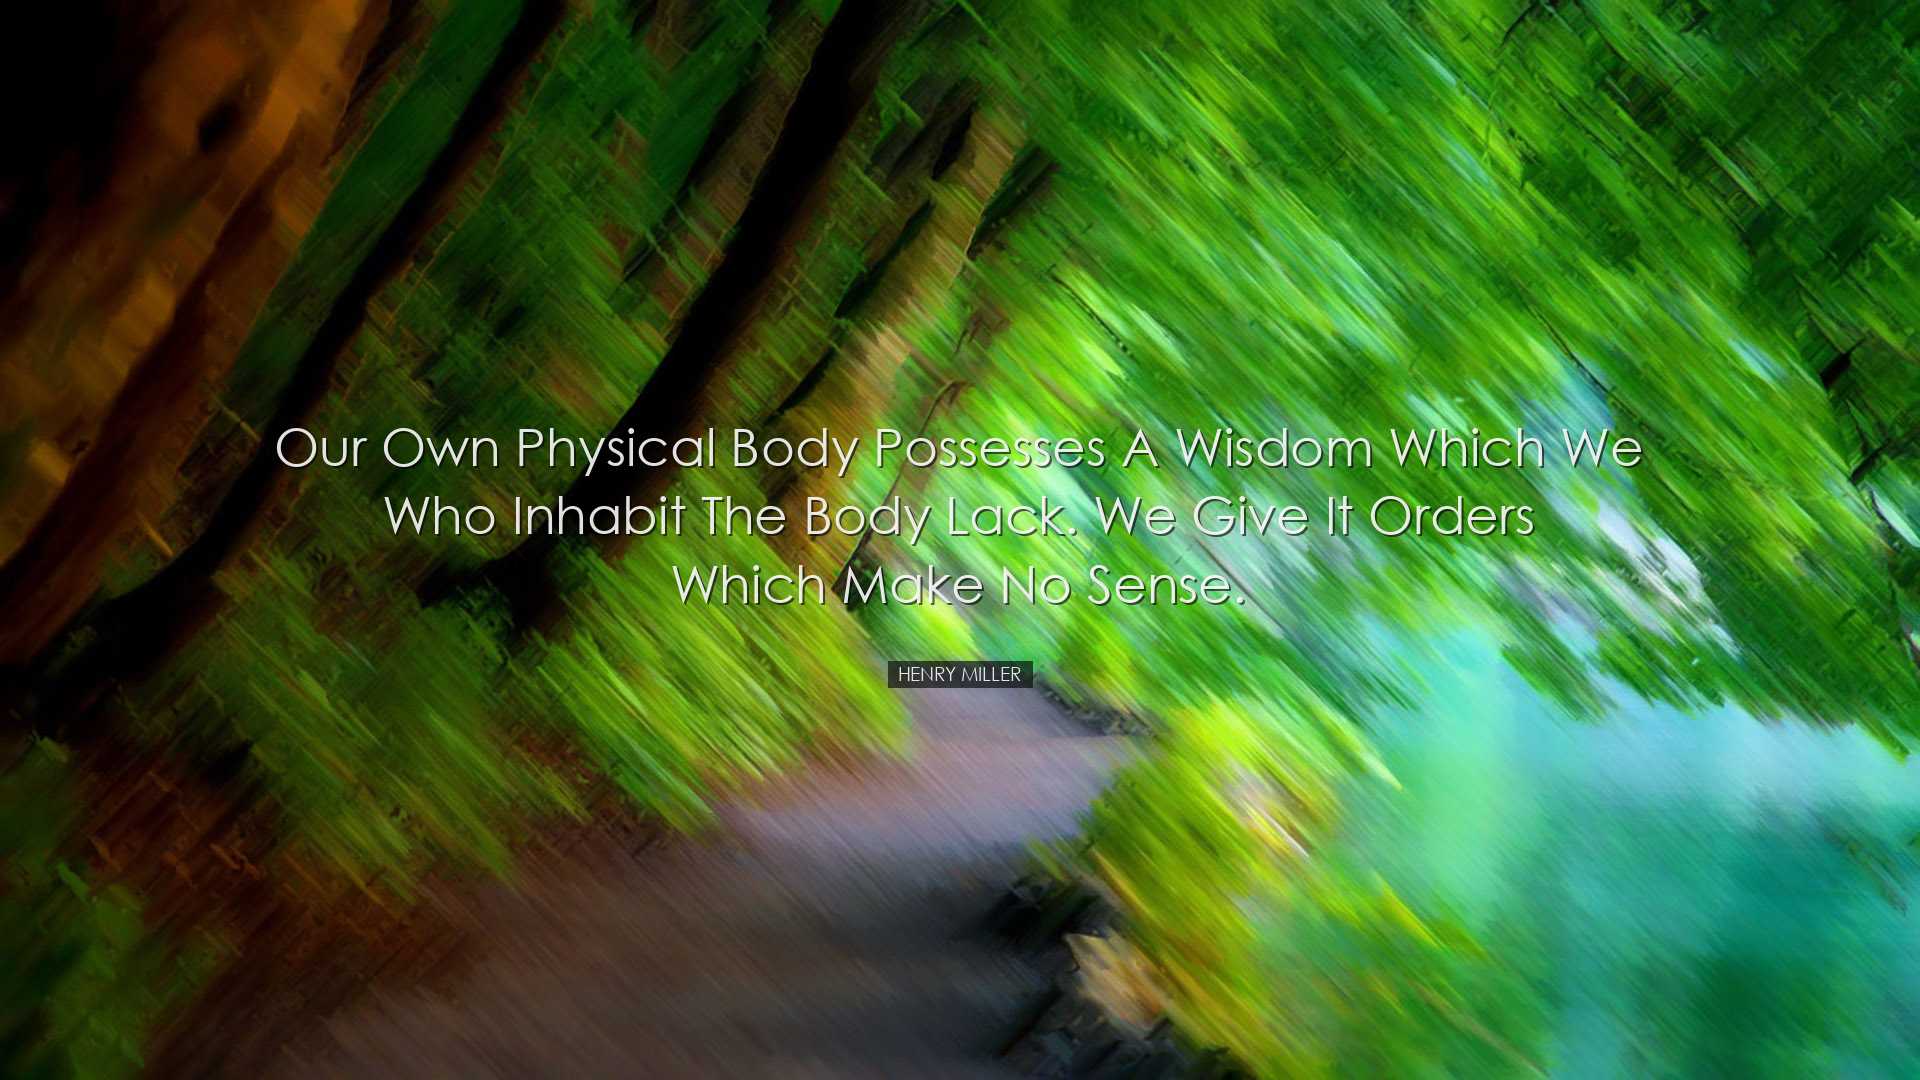 Our own physical body possesses a wisdom which we who inhabit the